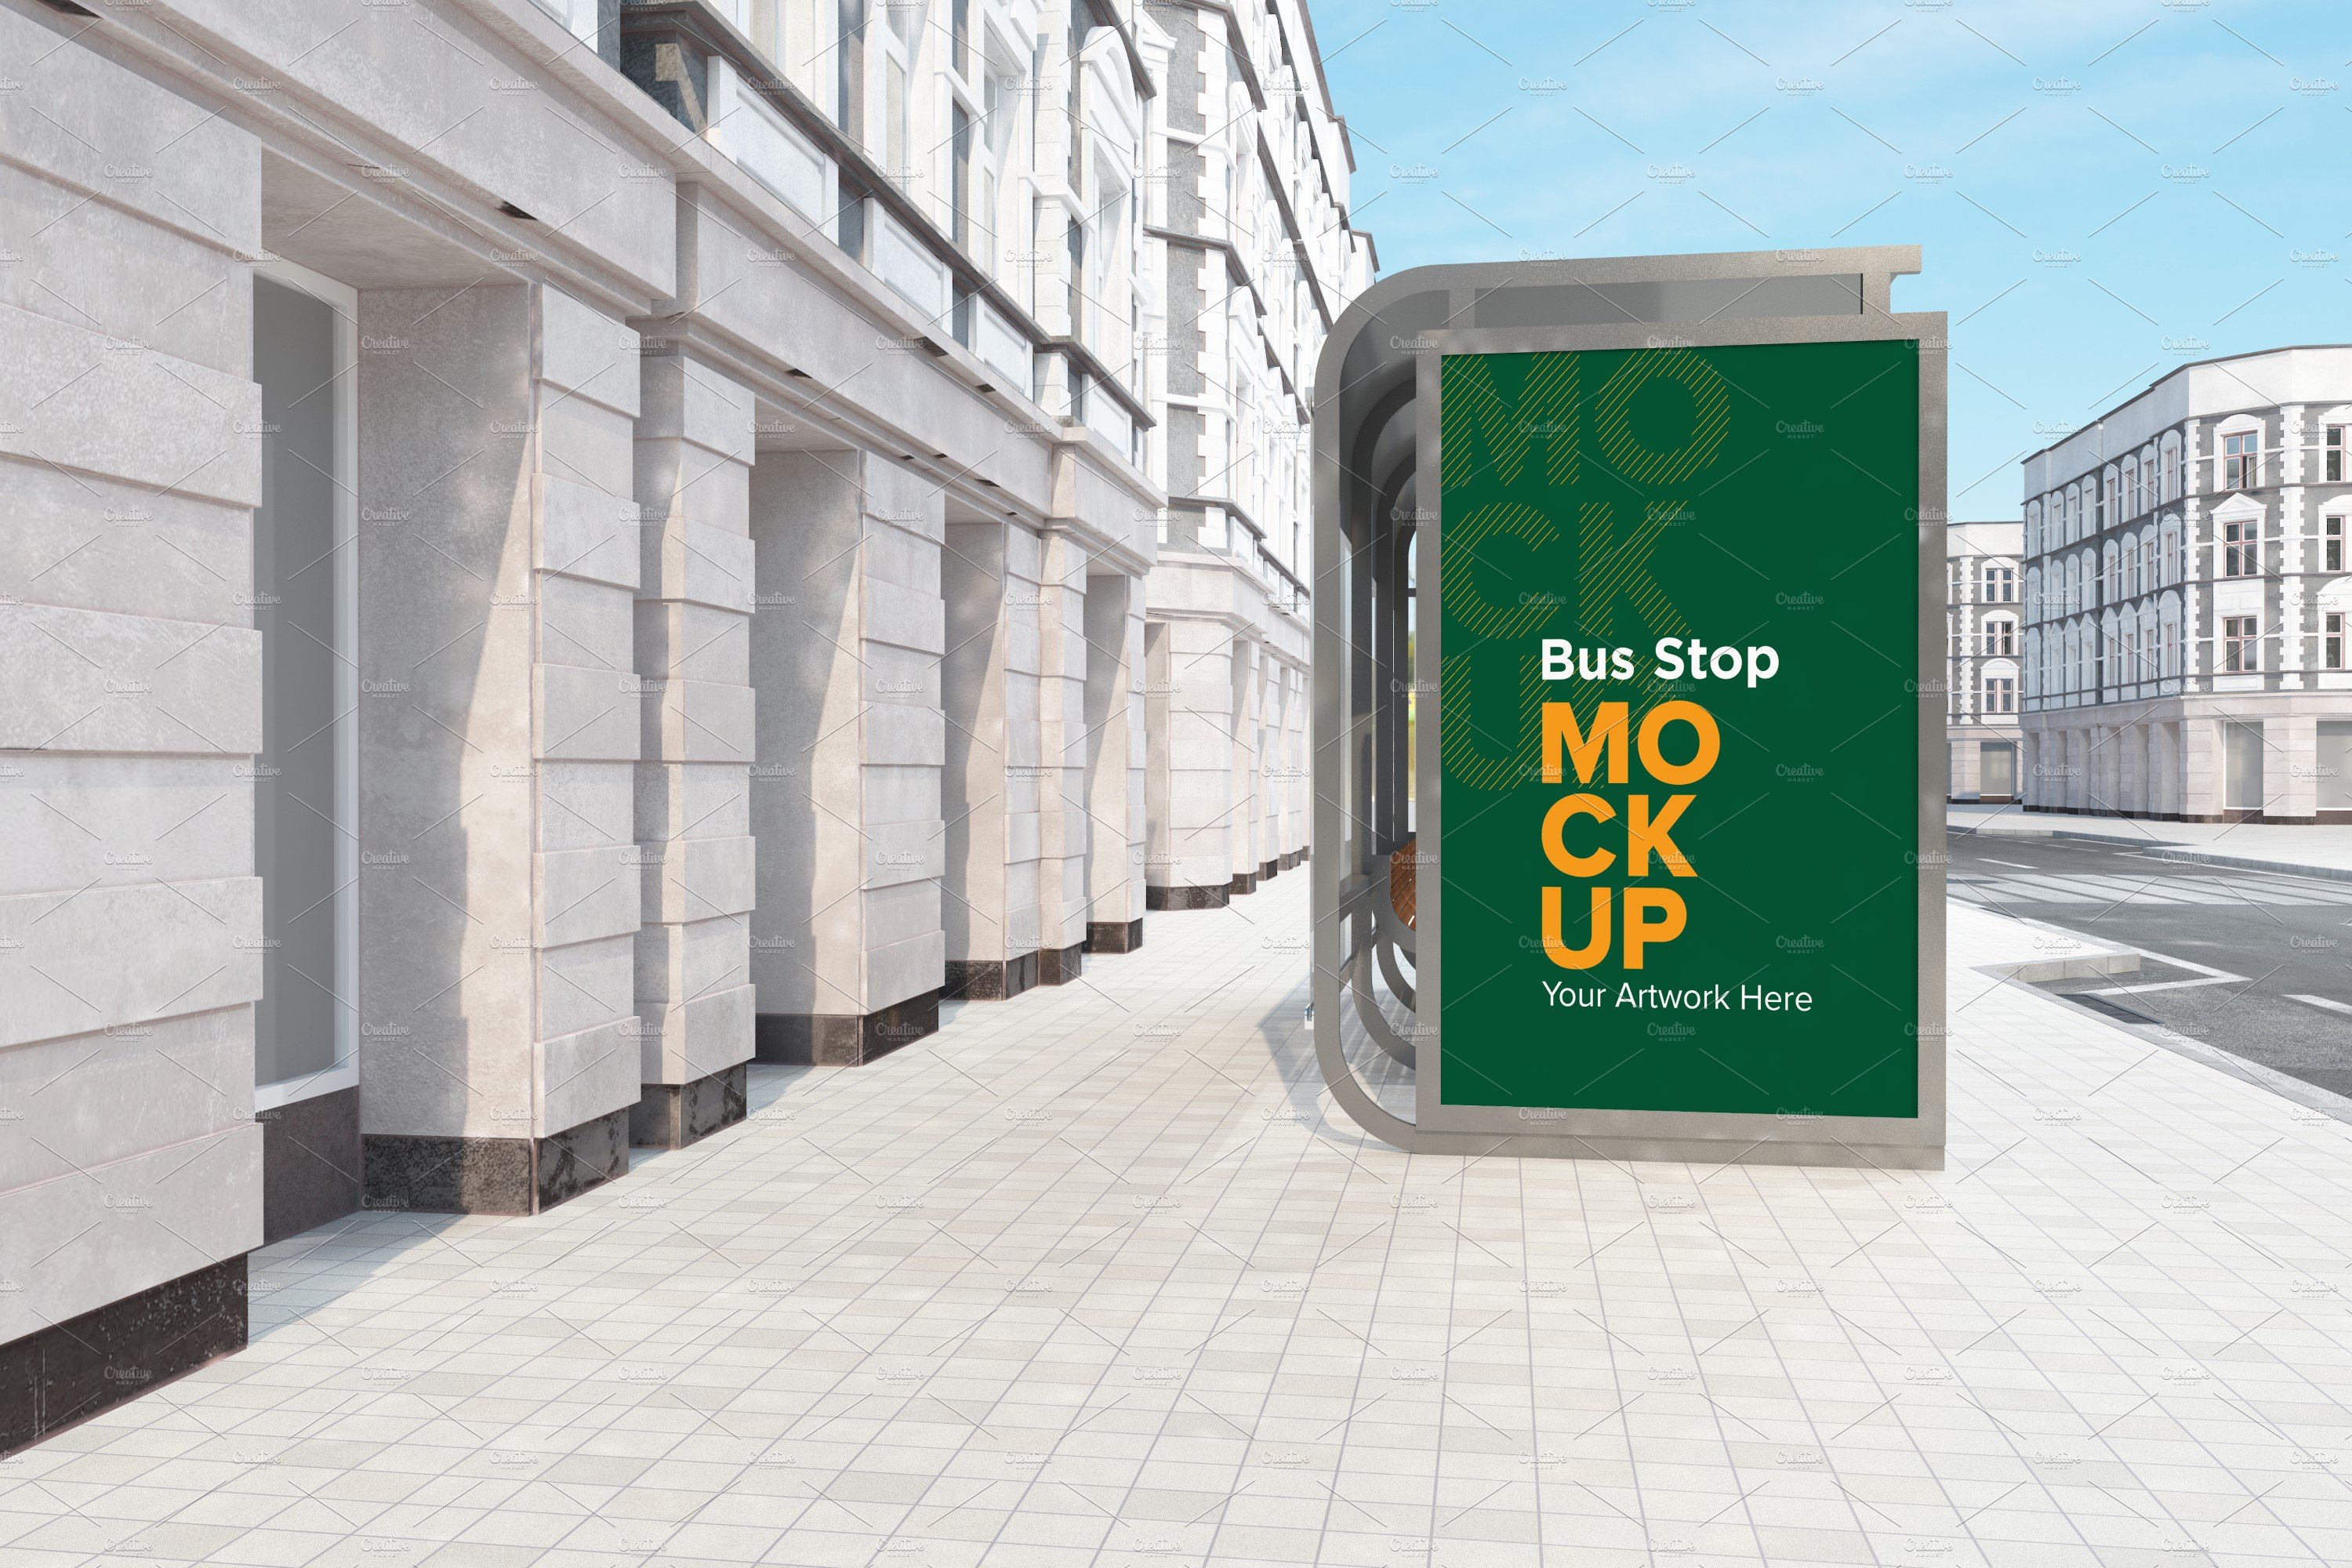 City Bus Stop Signage Mockup cover image.